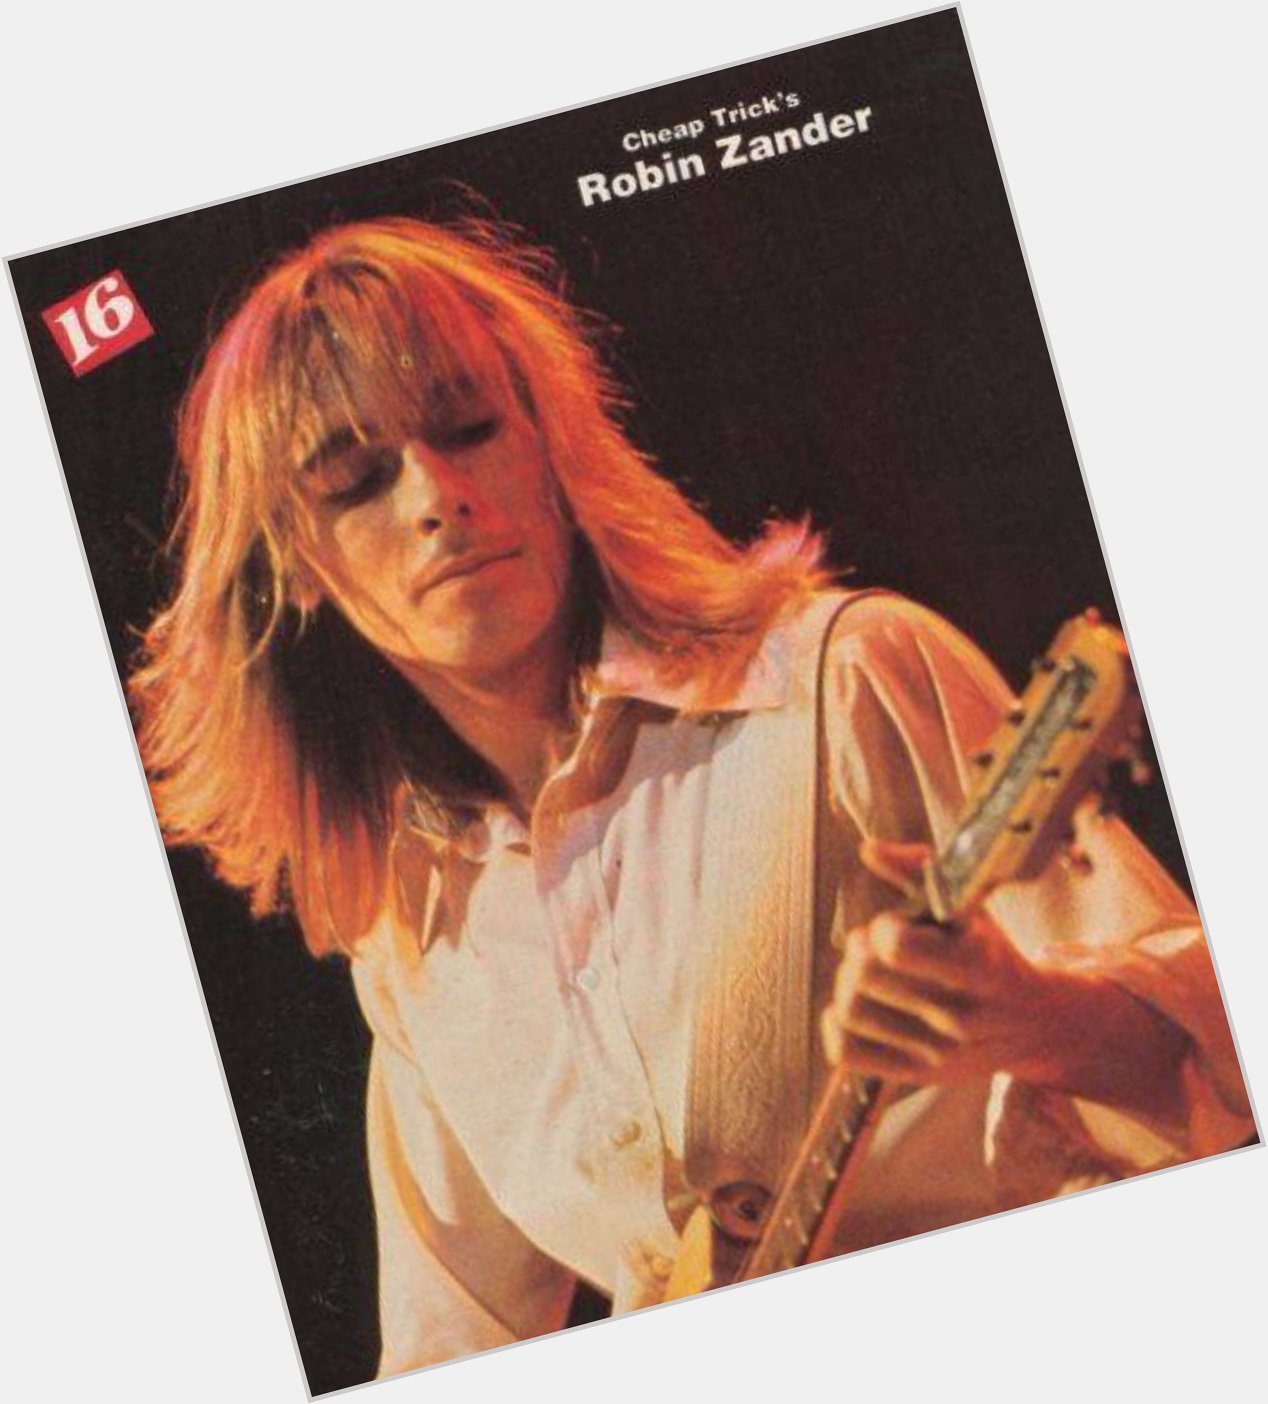 Mighty Happy Birthday, Robin Zander you\ll always be the touchstone for how to rock out some power pop. 